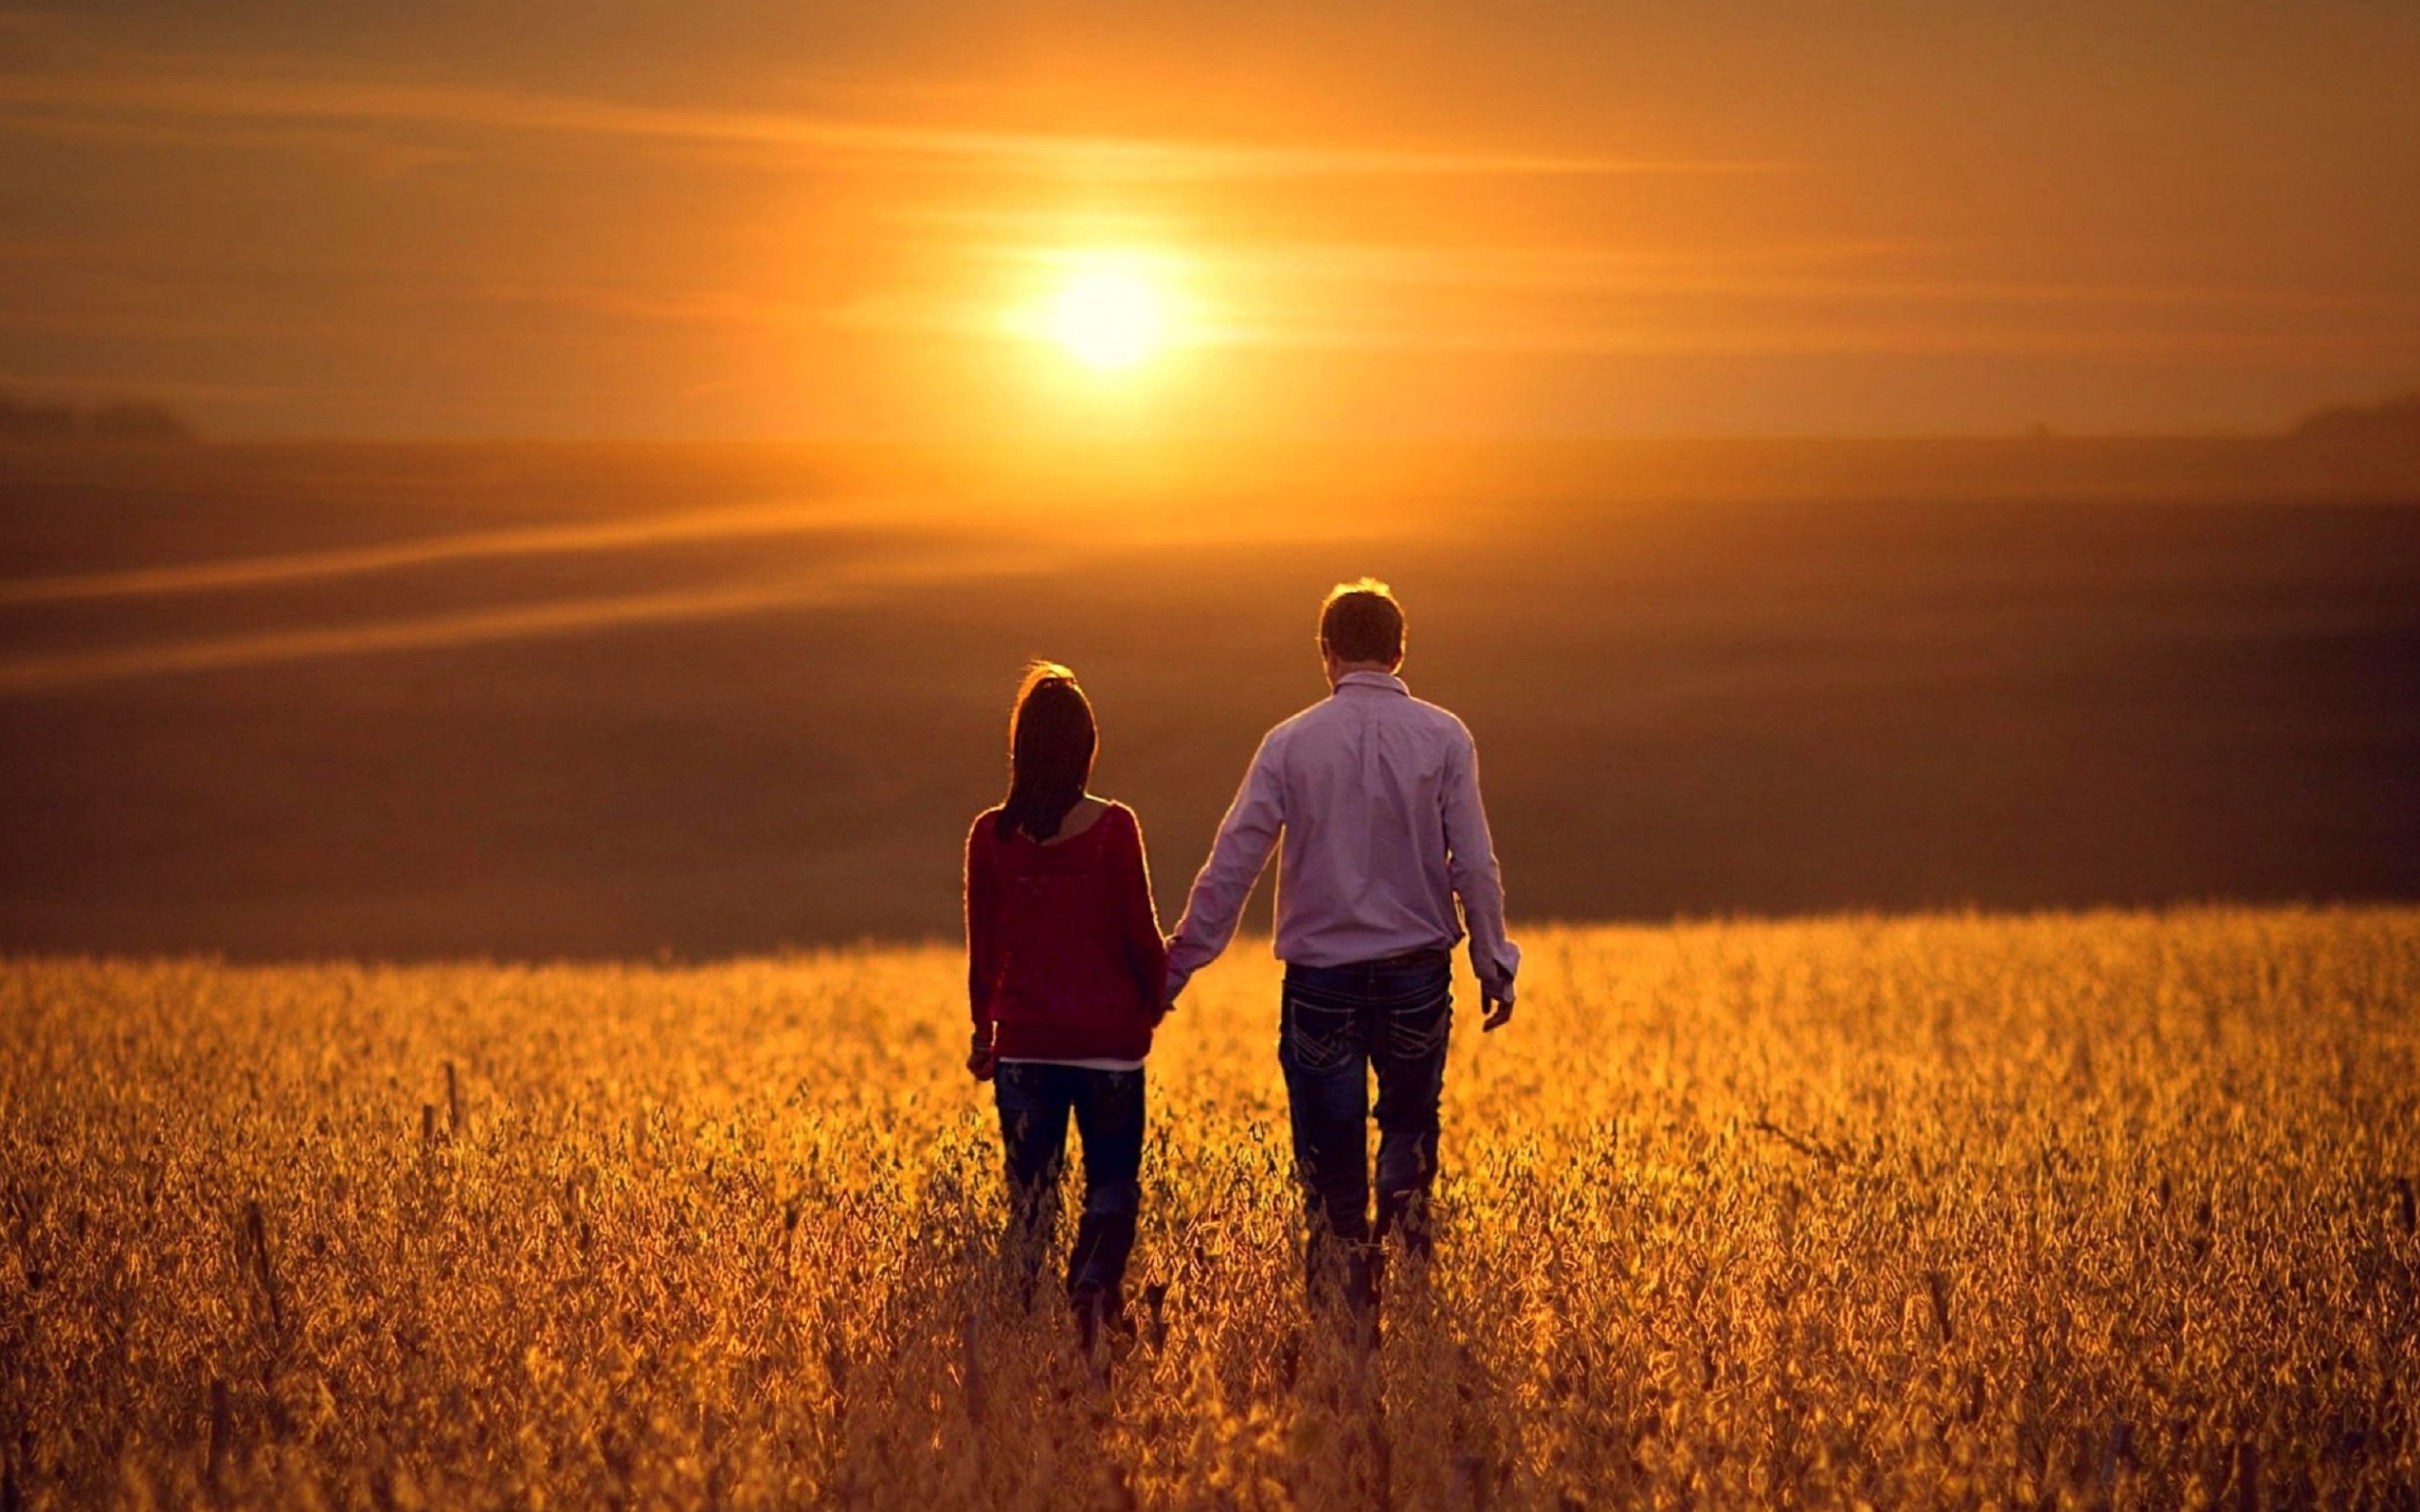 Couple at sunset wallpaper 2560x1600